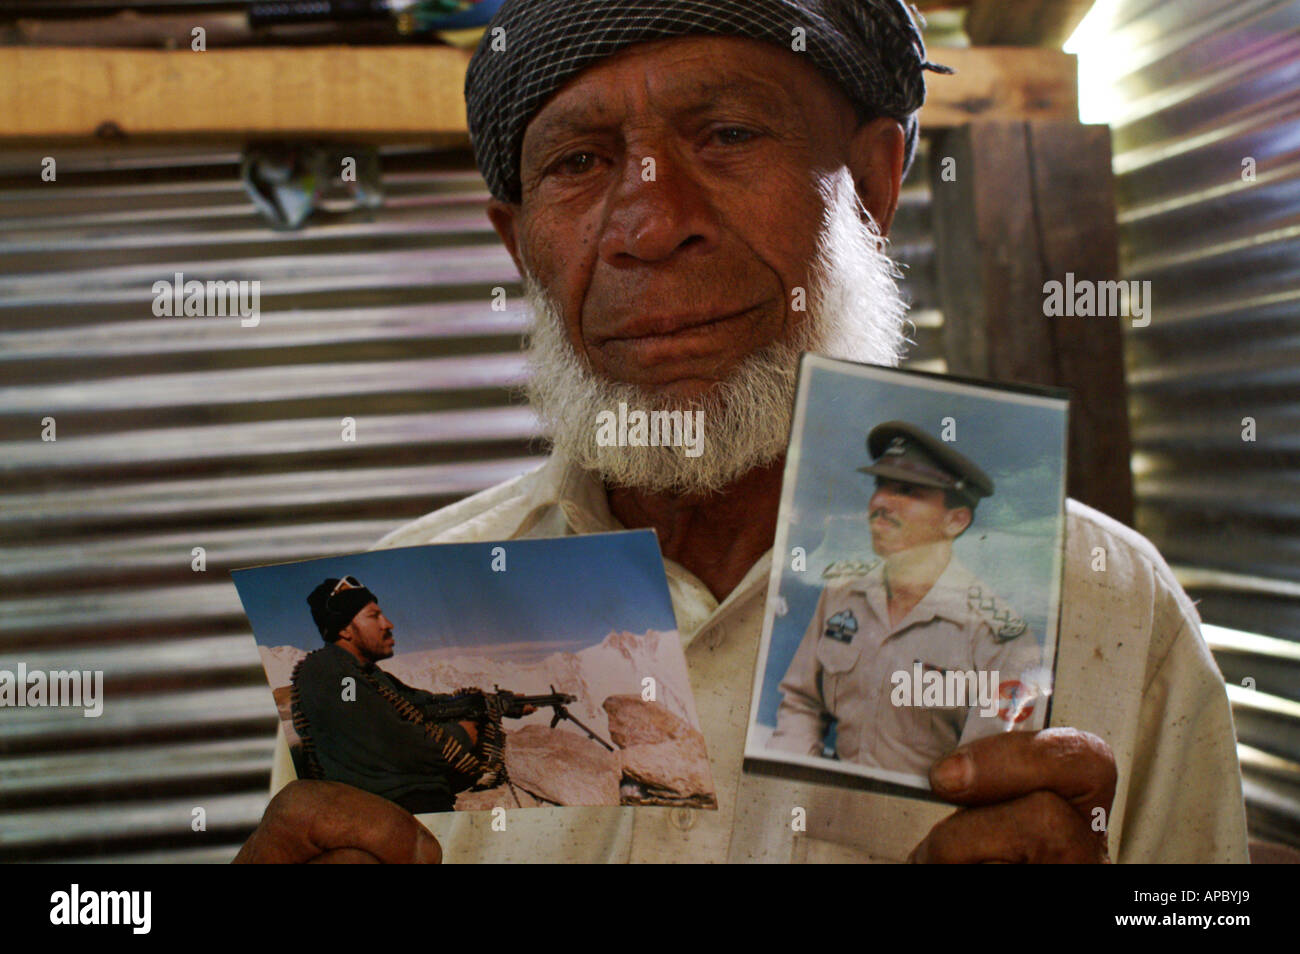 Old man in a shelter holding photographs of his son who died in the earthquake, Sarash Village, Manshera, NWFP, Pakistan Stock Photo